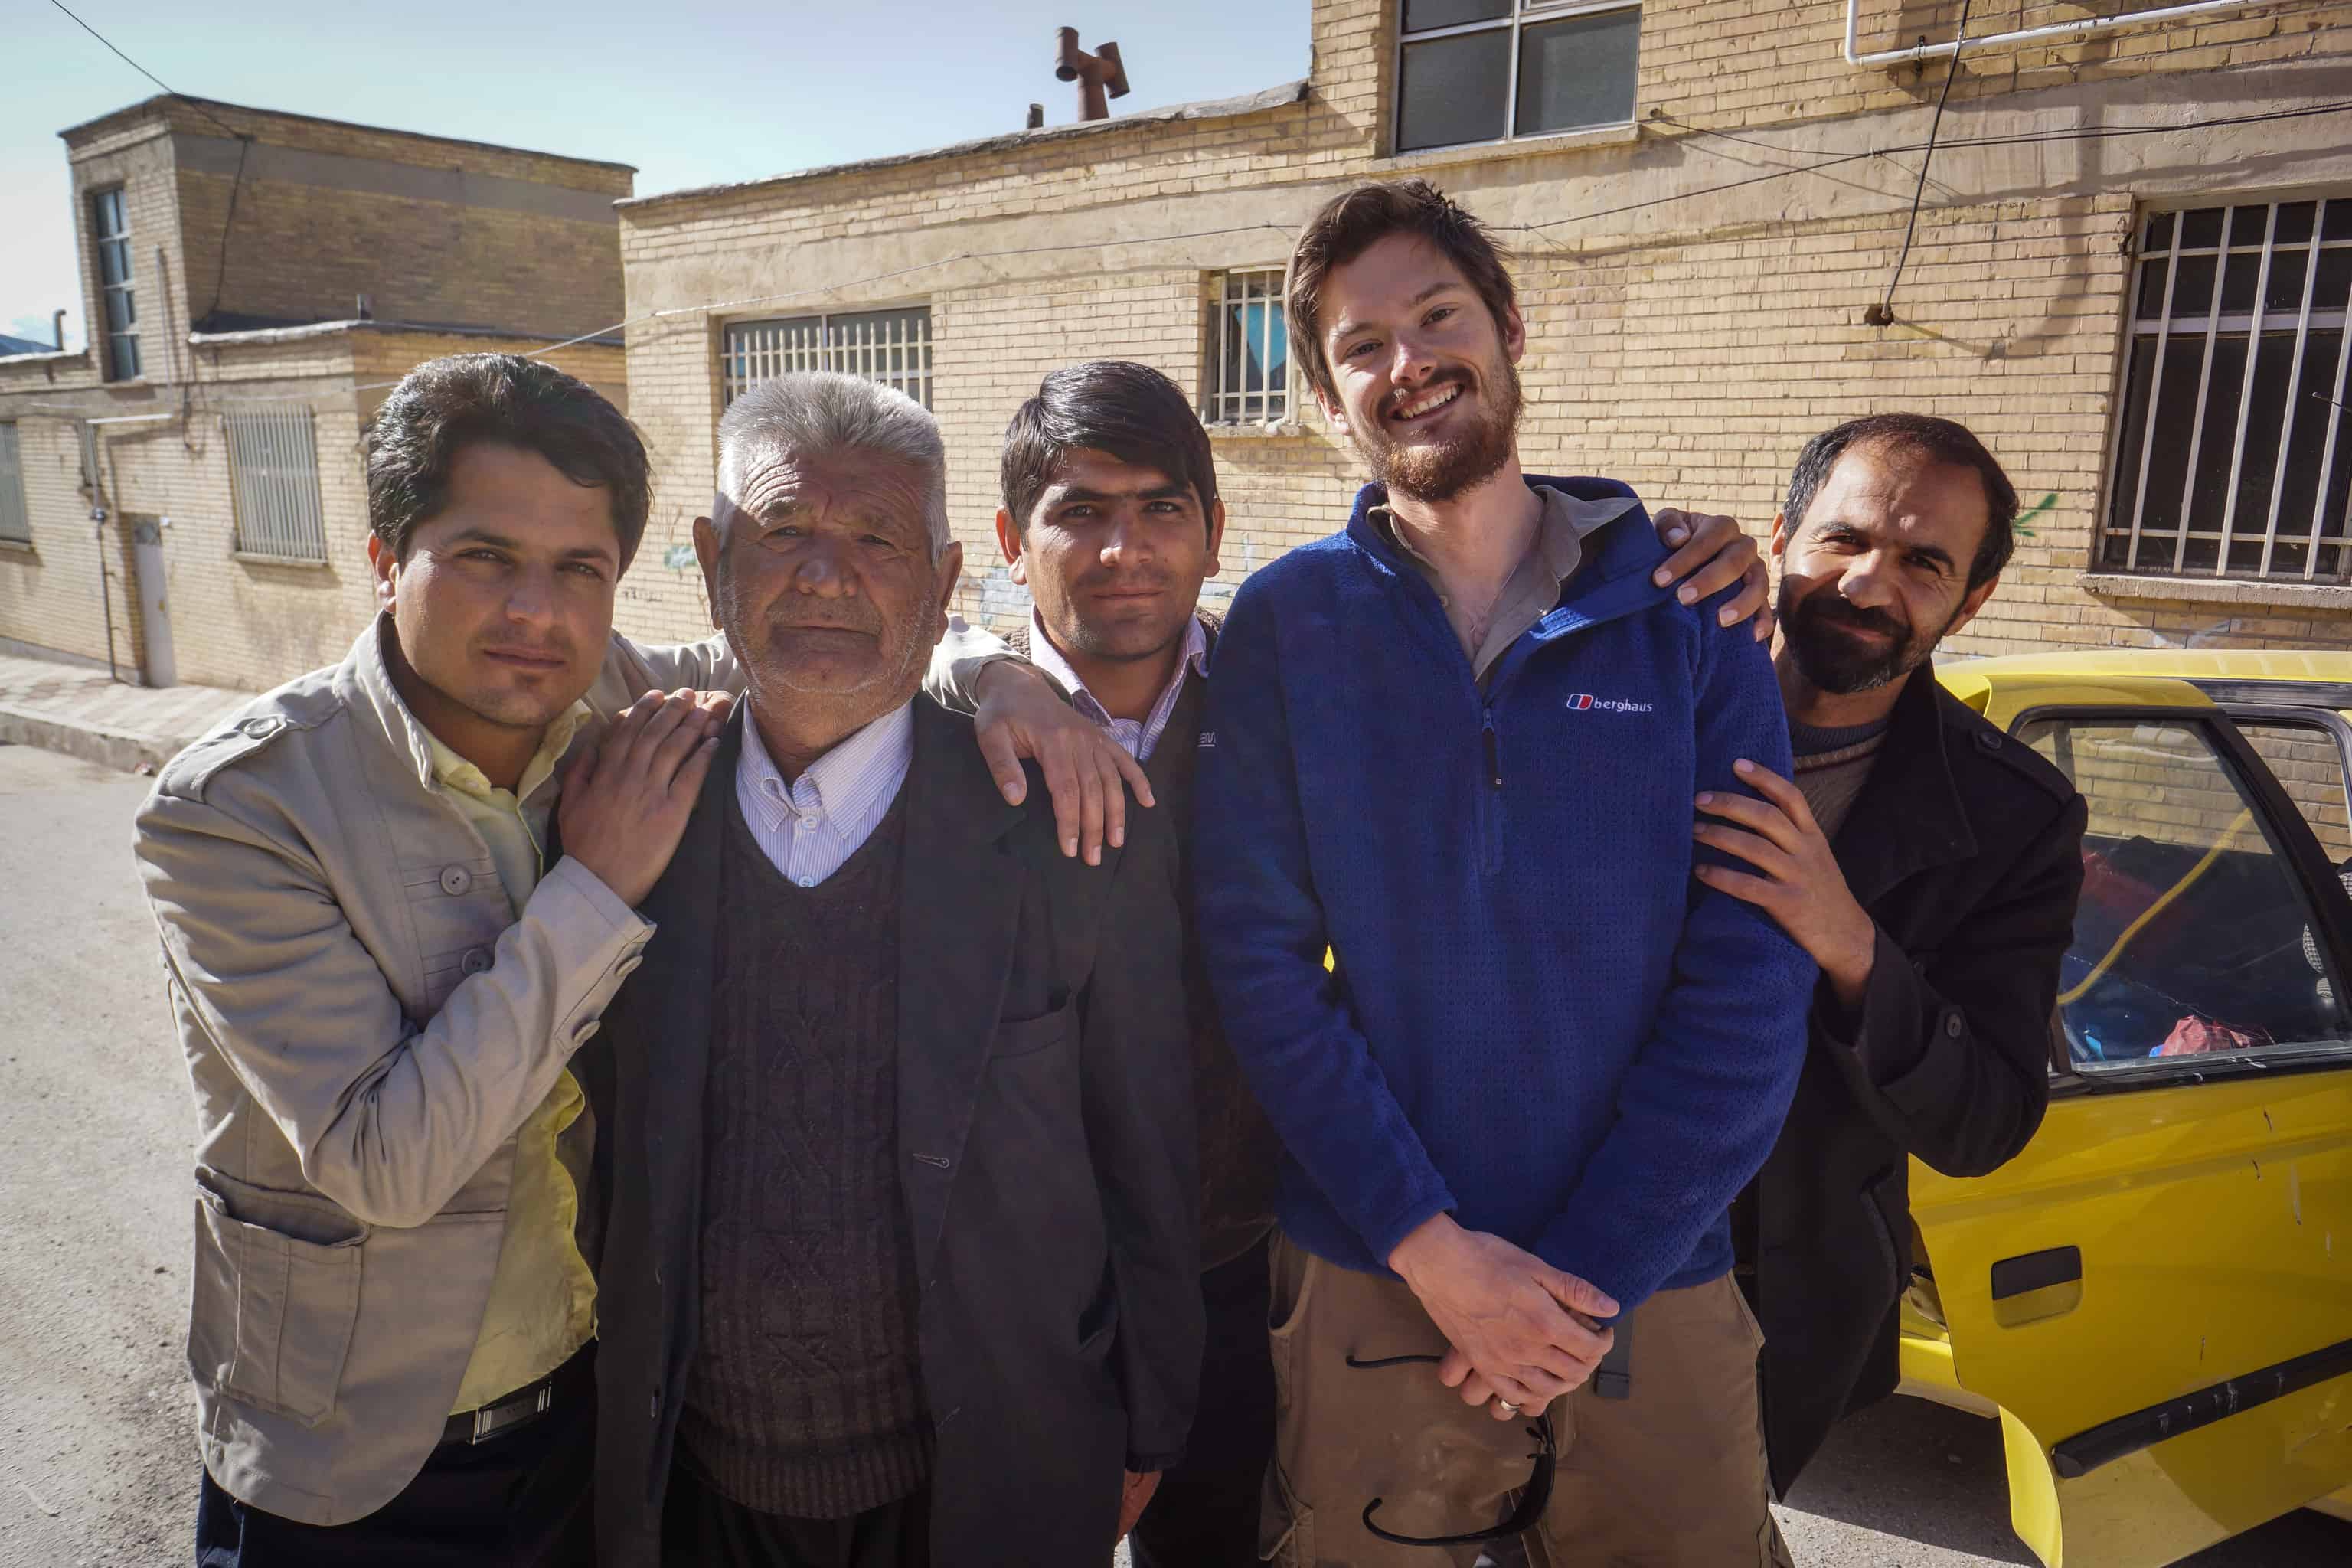 Fluent In Spanish, French, German, Italian? Want To Help Show The World The Real Iran?